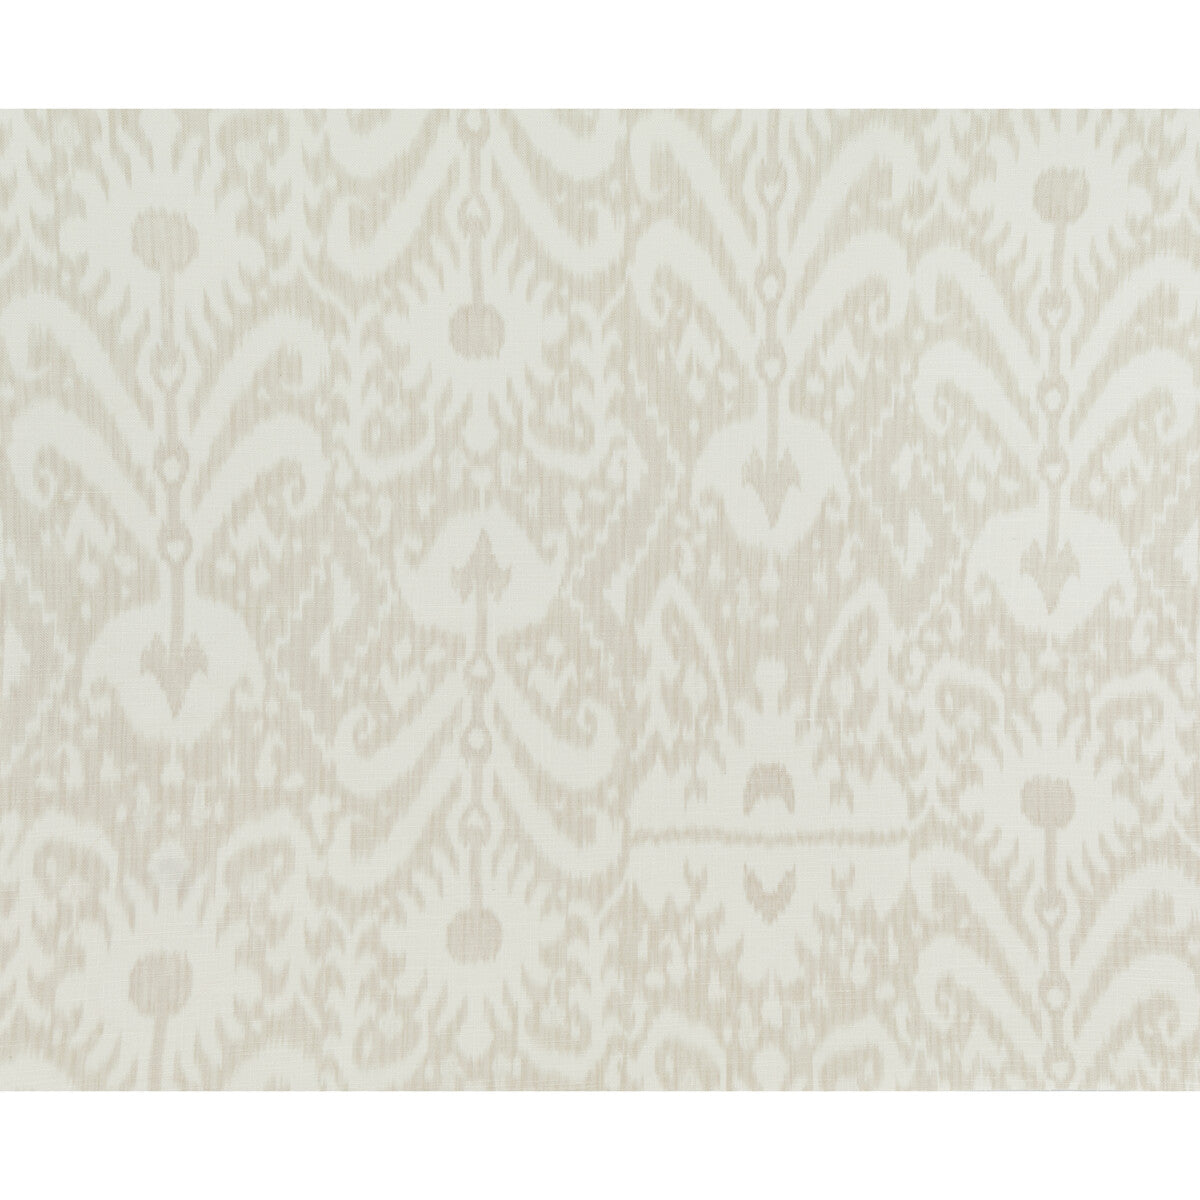 Kamara fabric in sand color - pattern BFC-3688.16.0 - by Lee Jofa in the Blithfield collection